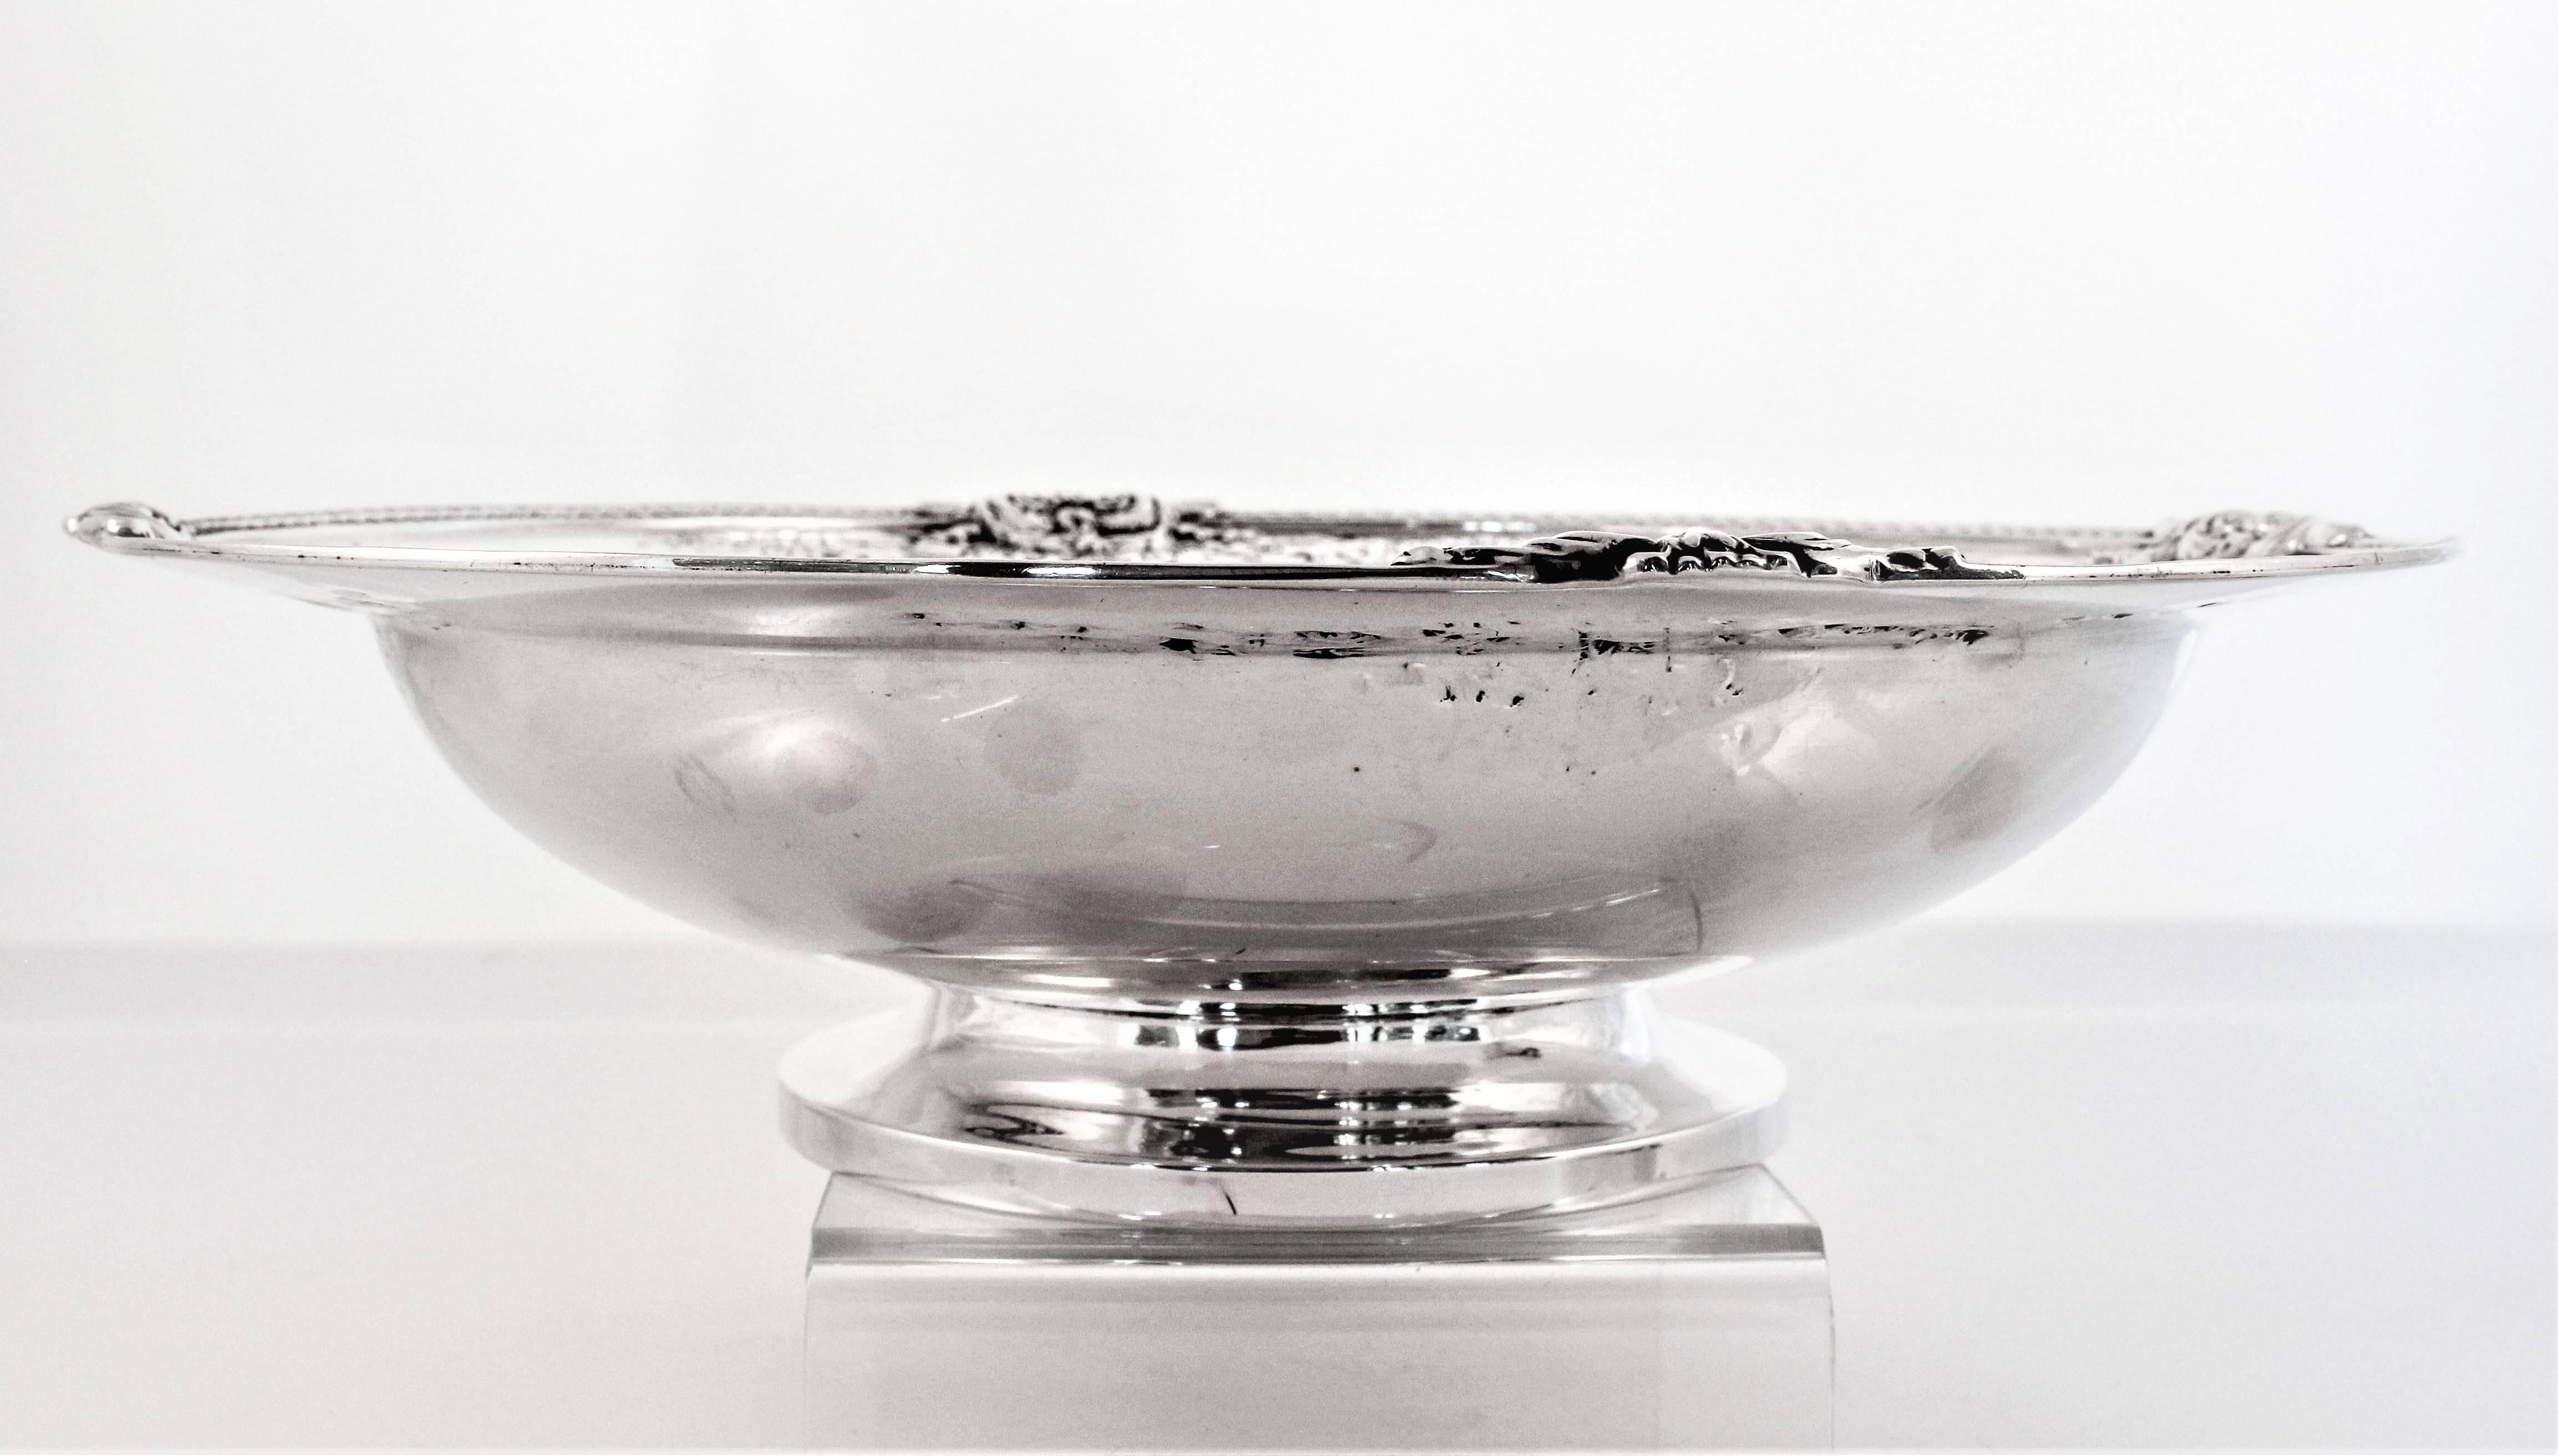 Standing proud on a centre pedestal, this bowl is just so pretty. A braid-like pattern encircles the rim. Pierced by four raised decorations on each side etched flowers and vines flow towards each other.